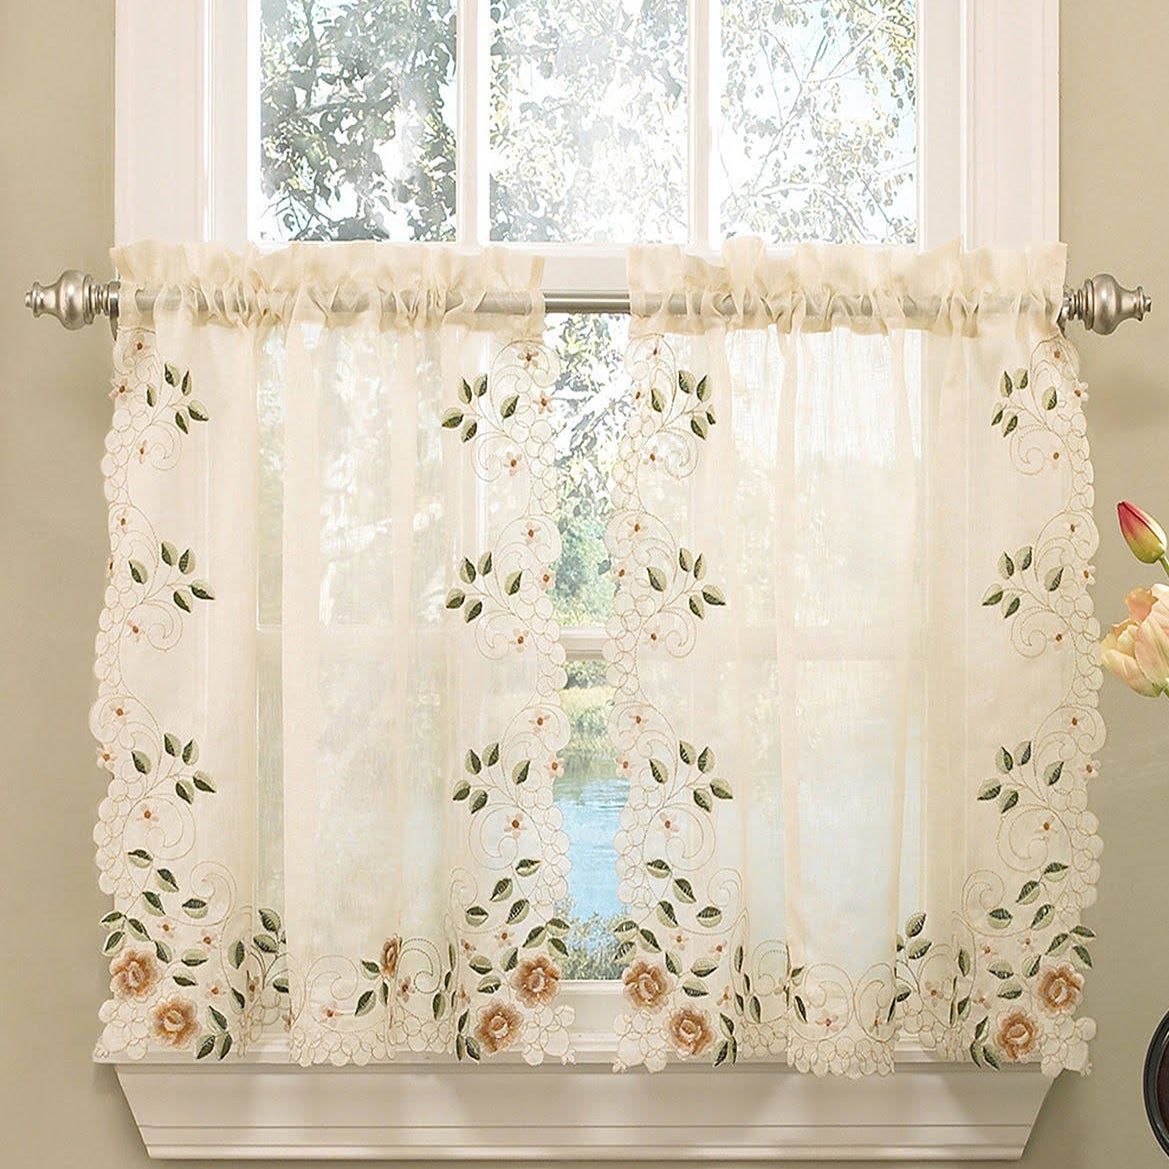 Old World Floral Embroidered Sheer Kitchen Curtain Parts  Tiers, Swags And  Valances Pertaining To Floral Embroidered Sheer Kitchen Curtain Tiers, Swags And Valances (View 7 of 20)